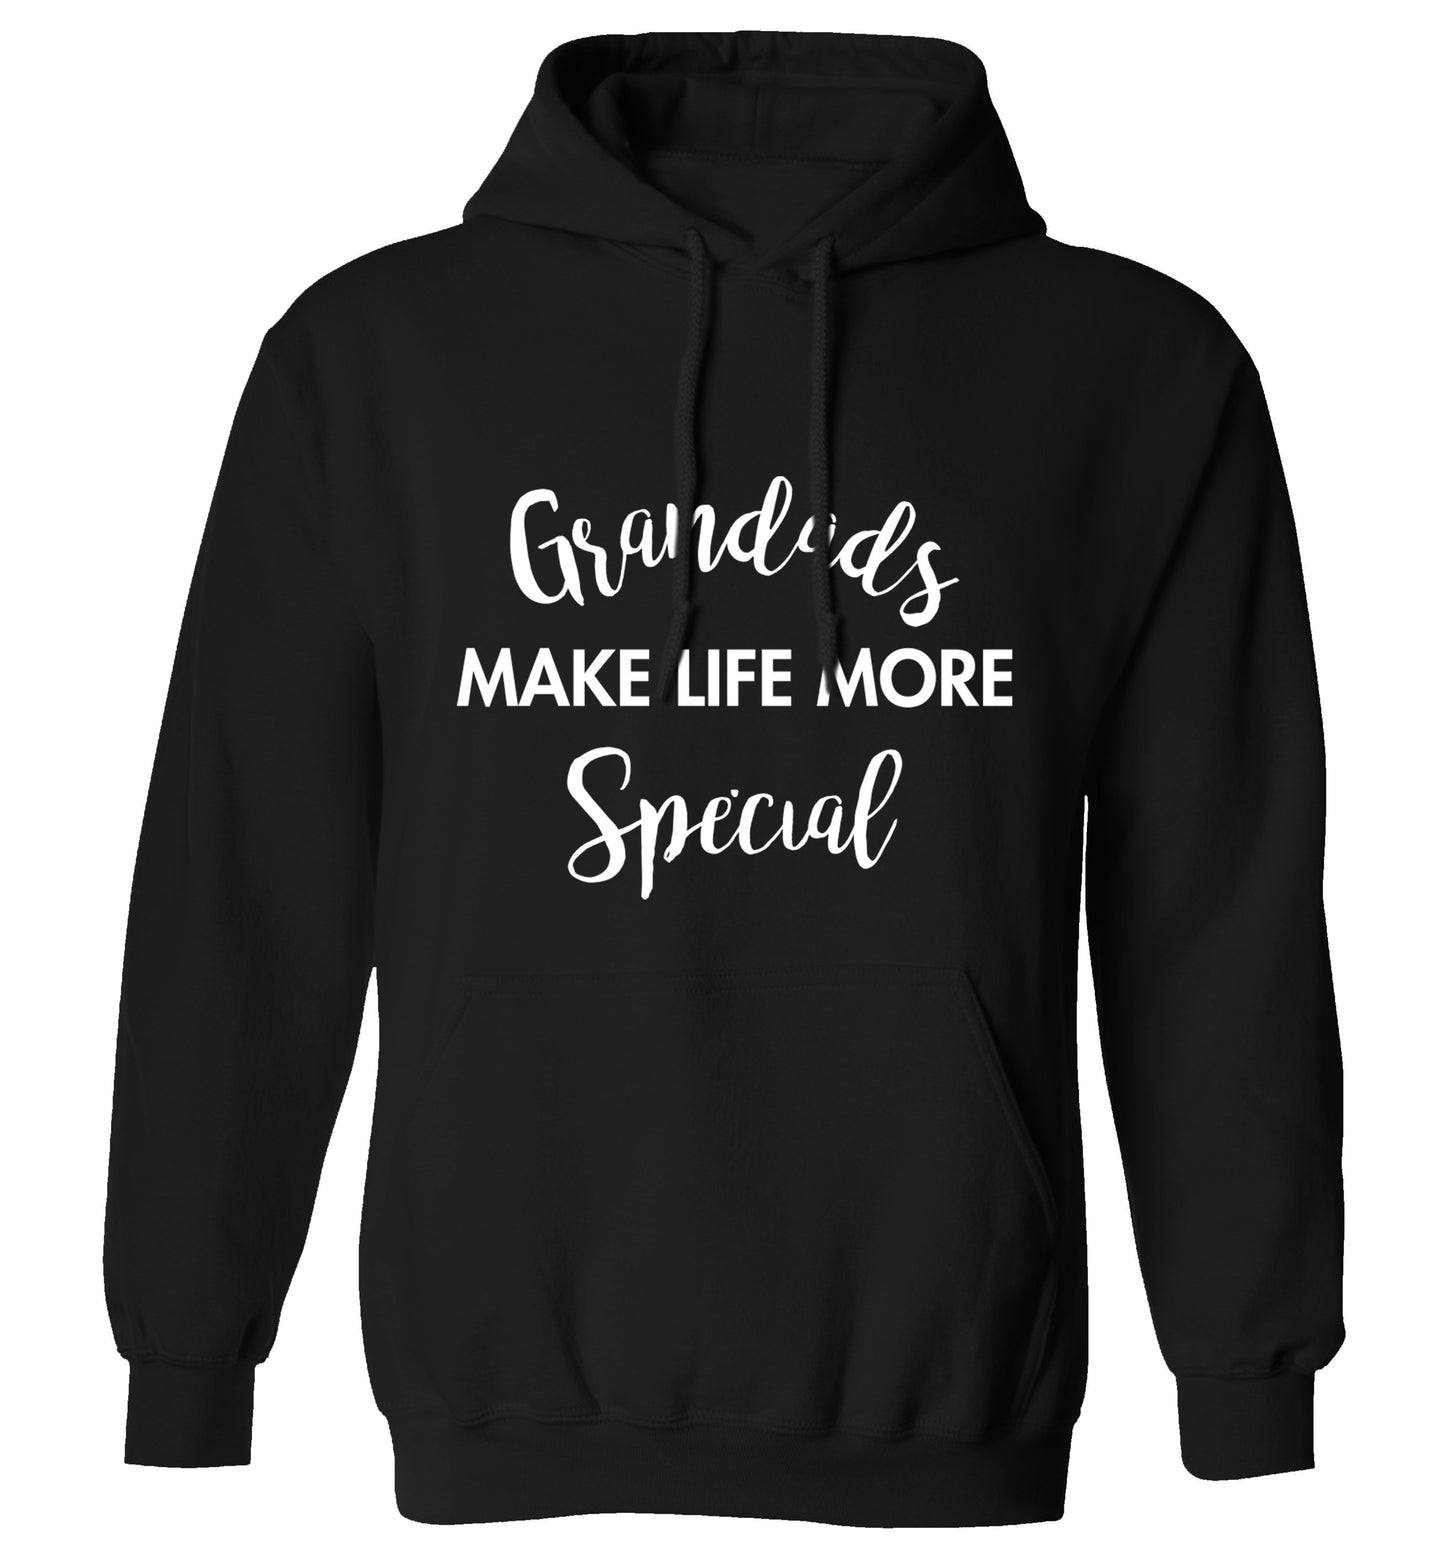 Grandads make life more special adults unisex black hoodie 2XL